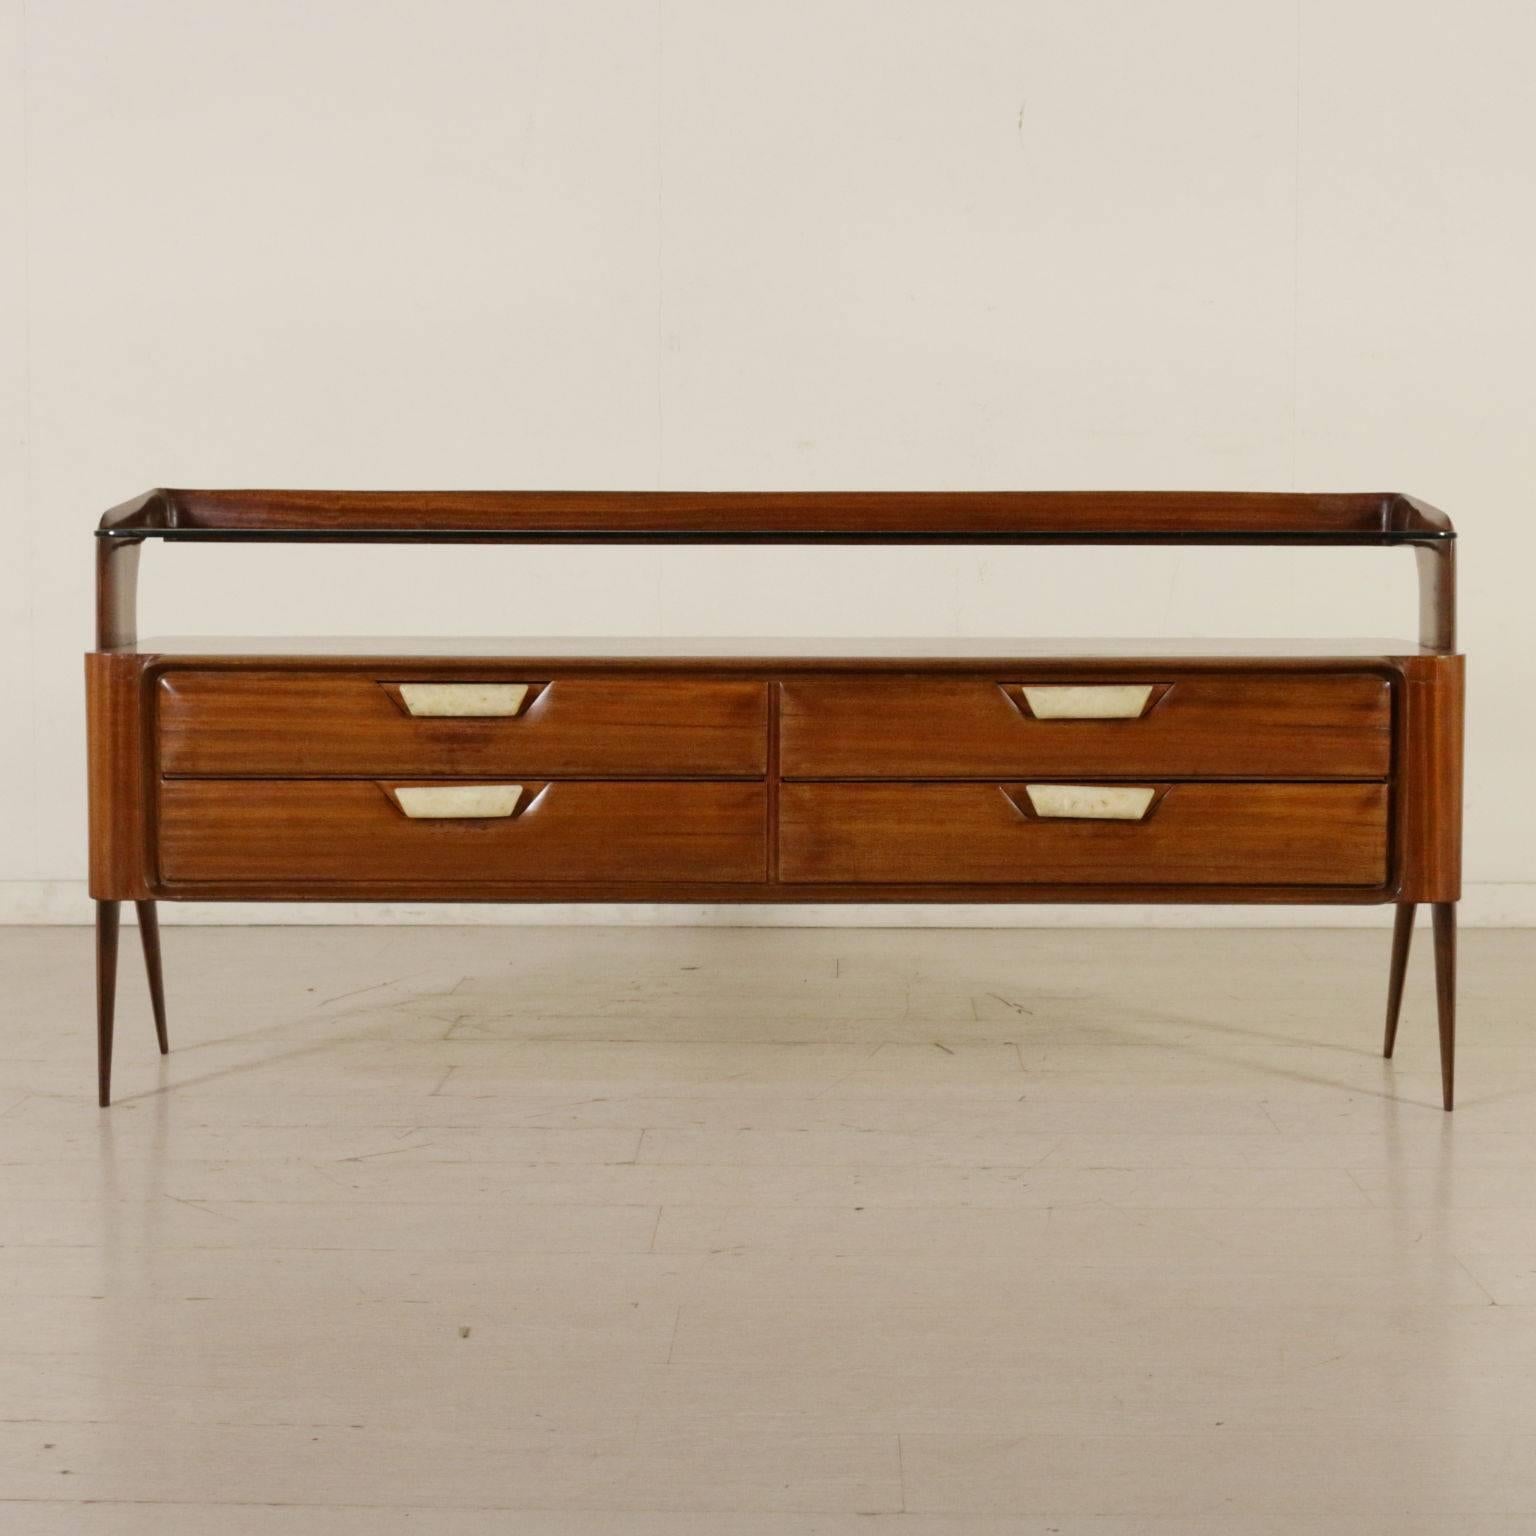 A buffet with mirror, mahogany veneer, glass shelf, onyx handles. The frame in which the mirror is included is made of brass. Manufactured in Italy, 1950s.